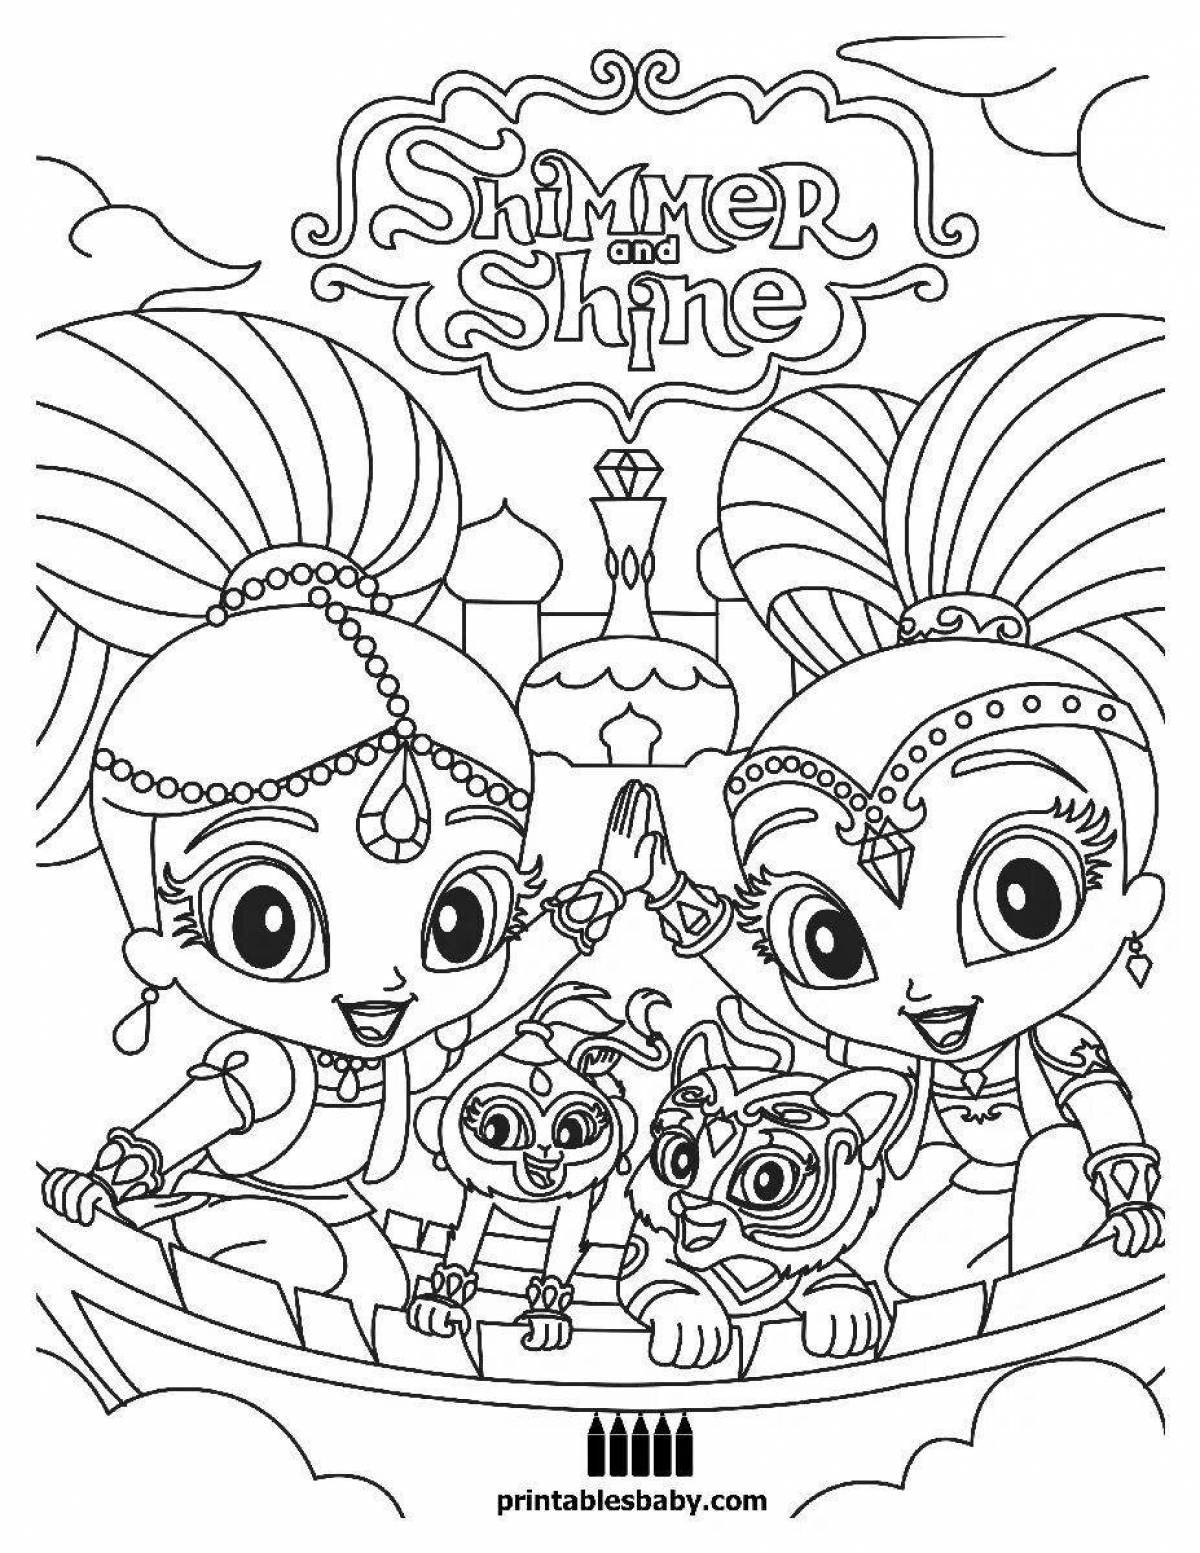 Majestic coloring for girls shimmer and shine